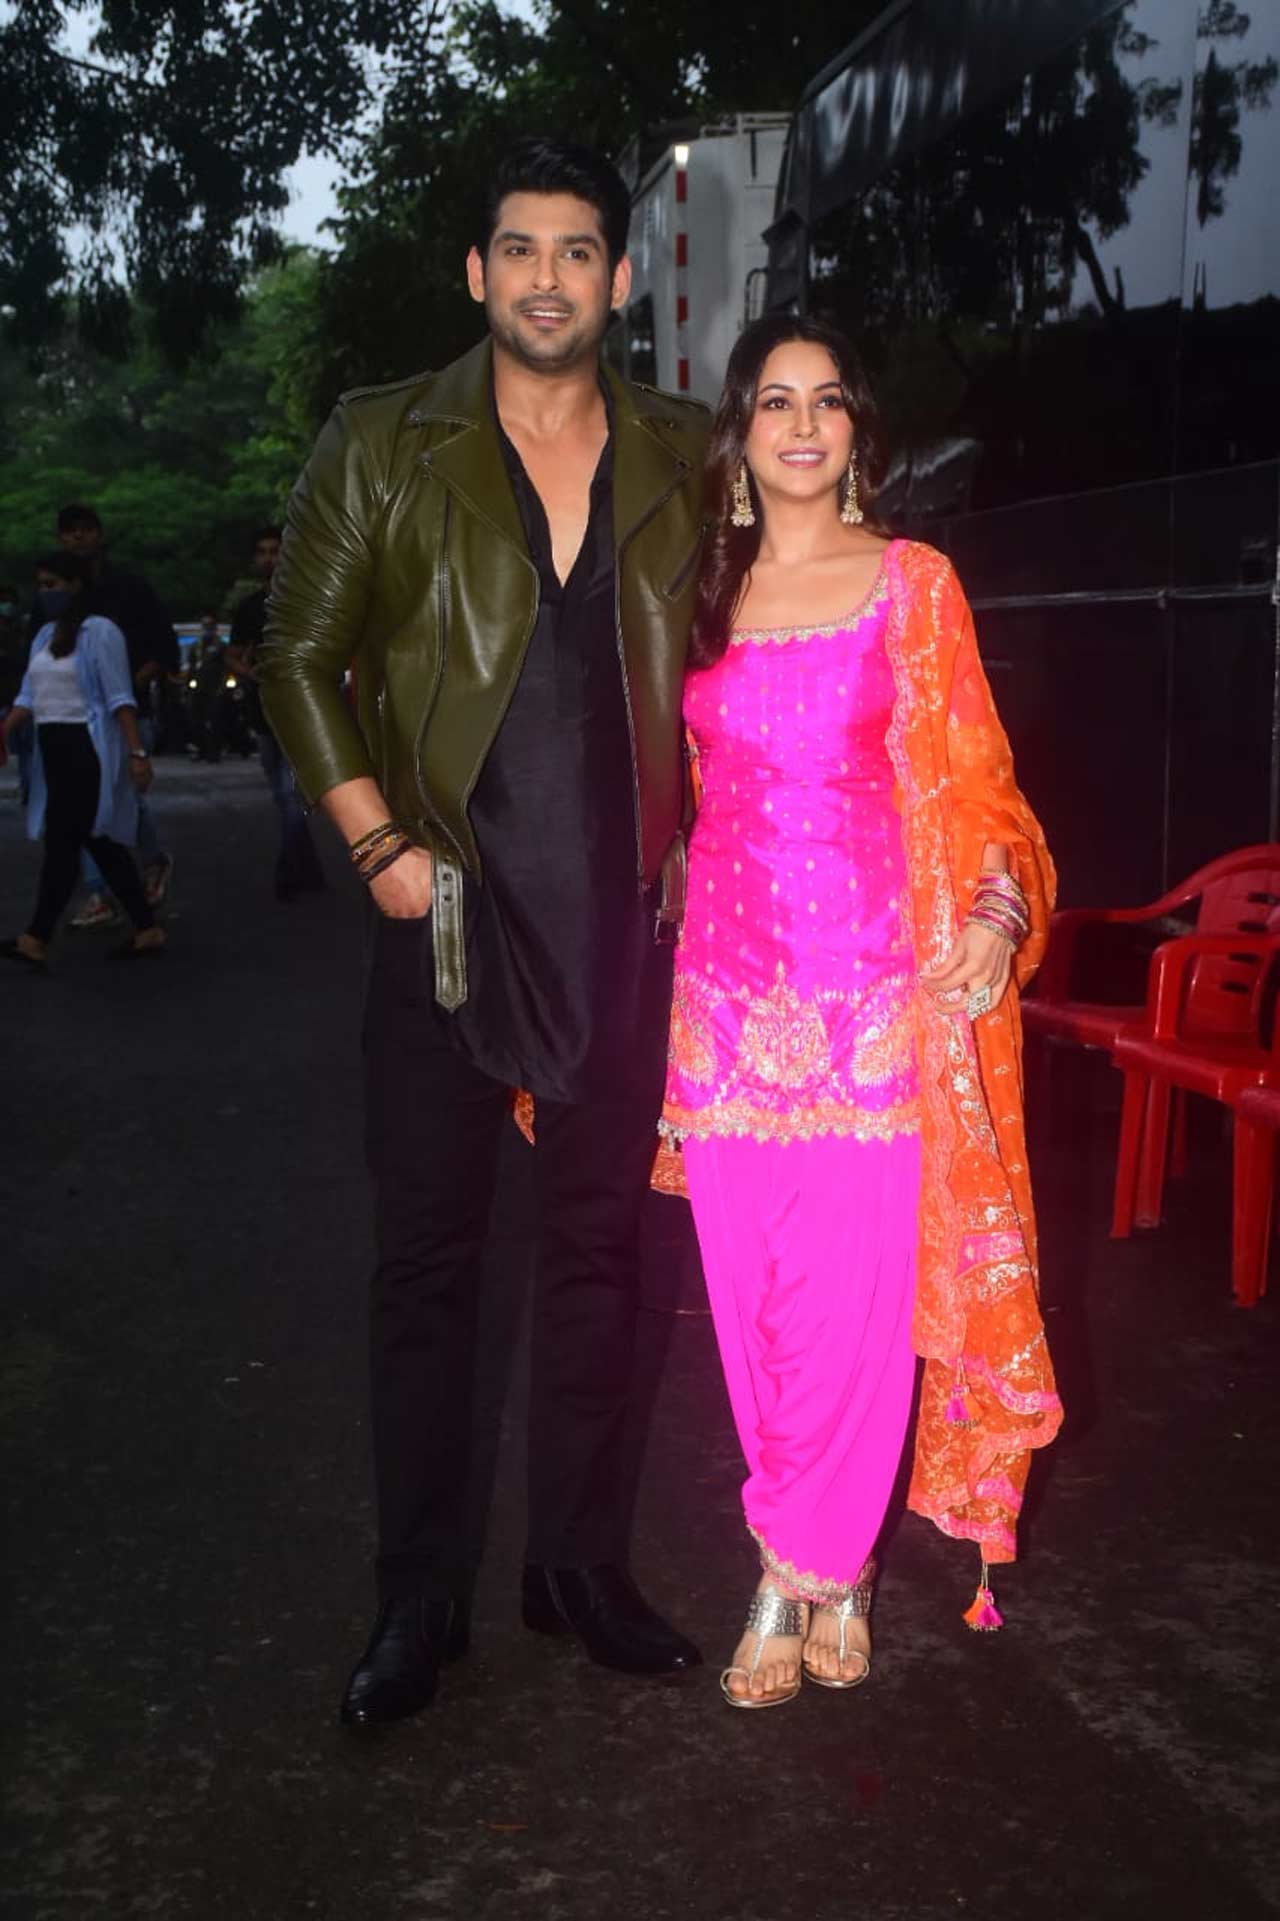 Shehnaaz Gill and Siddharth Shukla were seen entering the Bigg Boss OTT sets as they entered the house over the weekend.